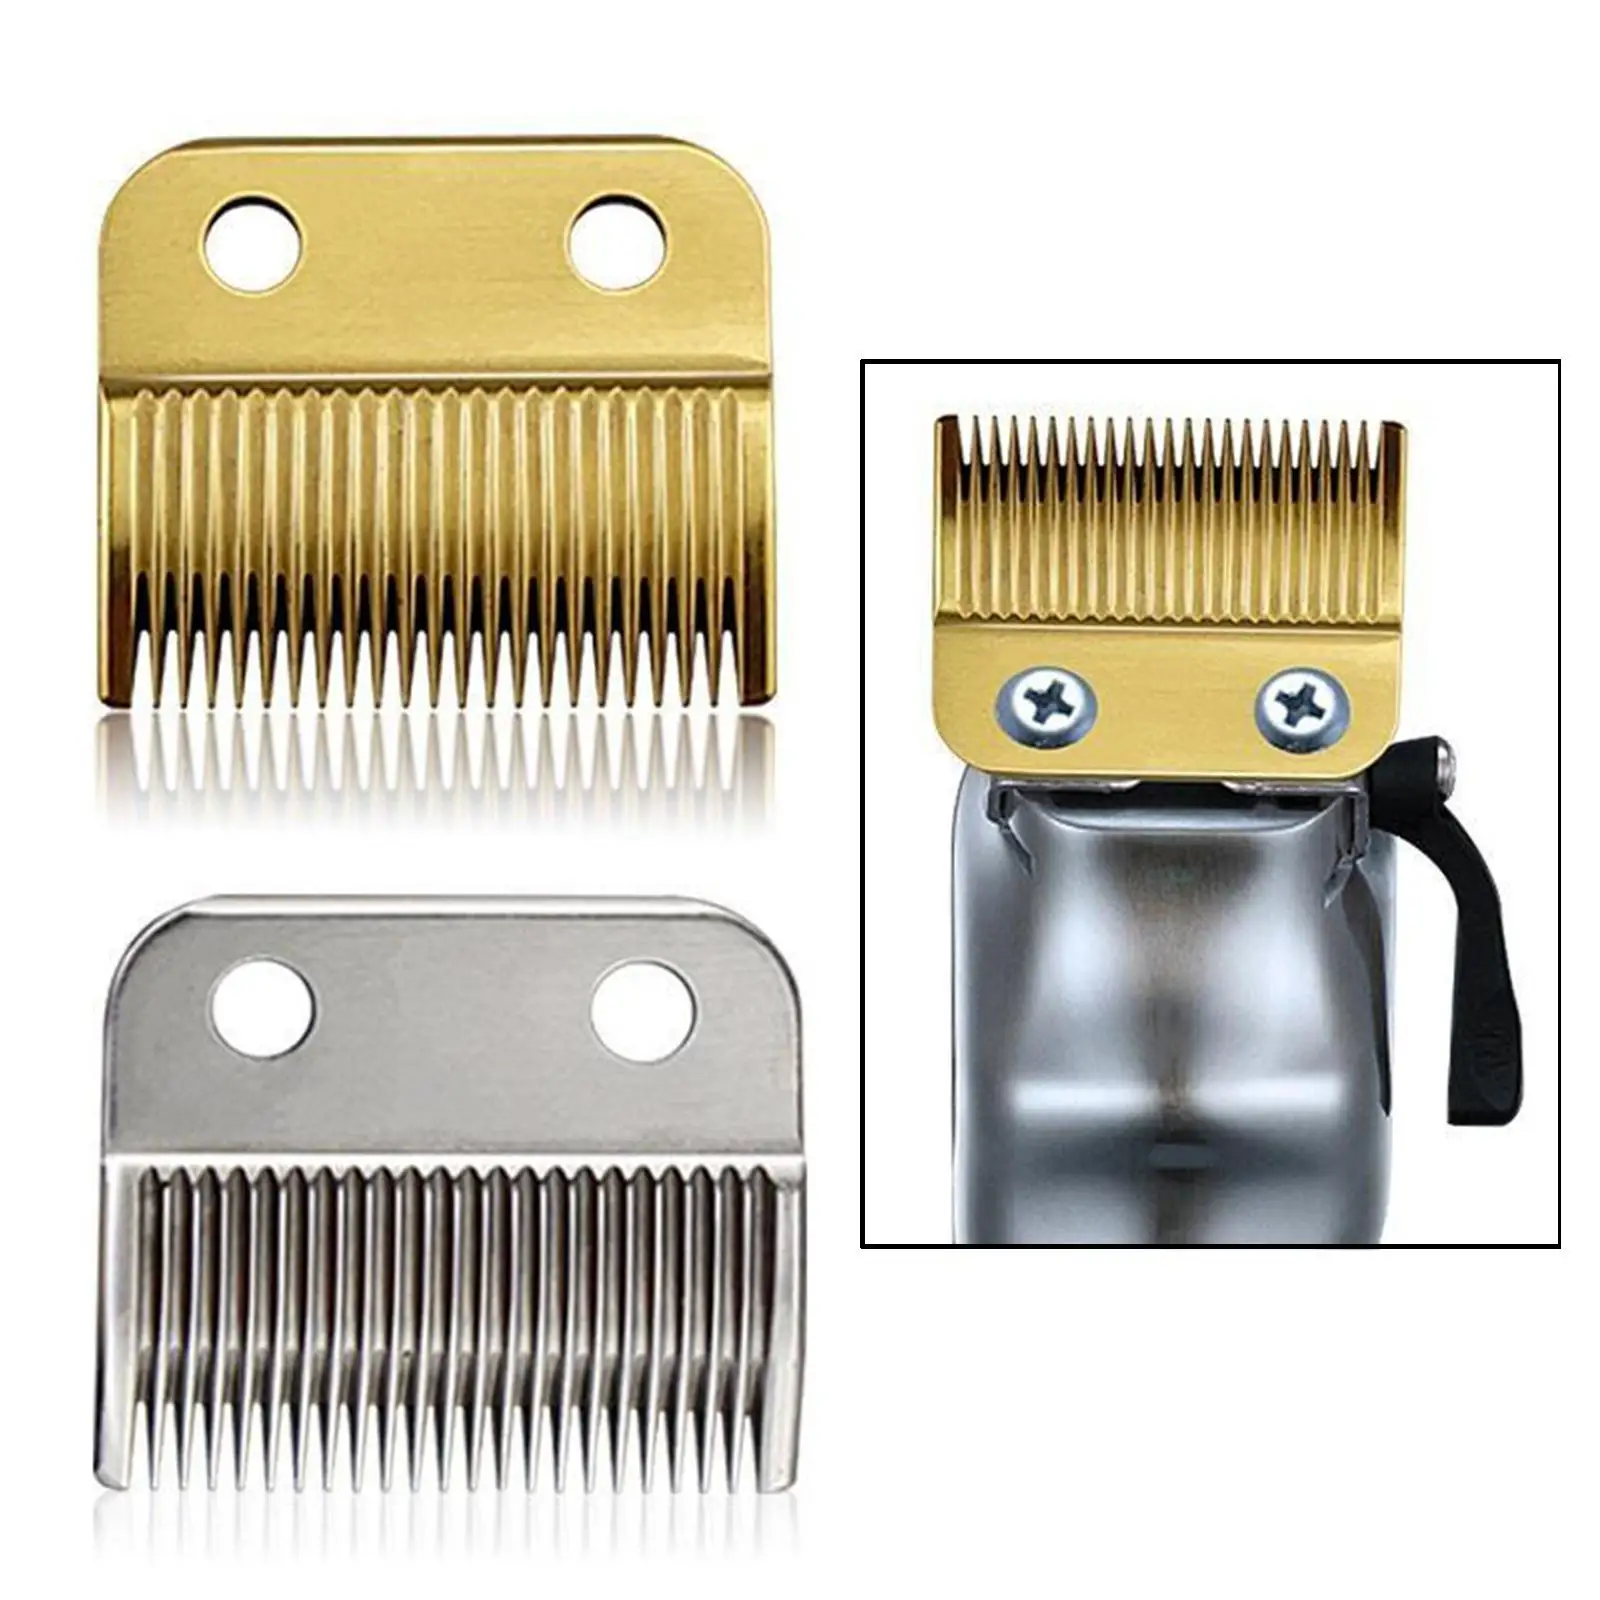 Stagger-Tooth Hair Trimmer Stainless Steel Cutter Head for 8504